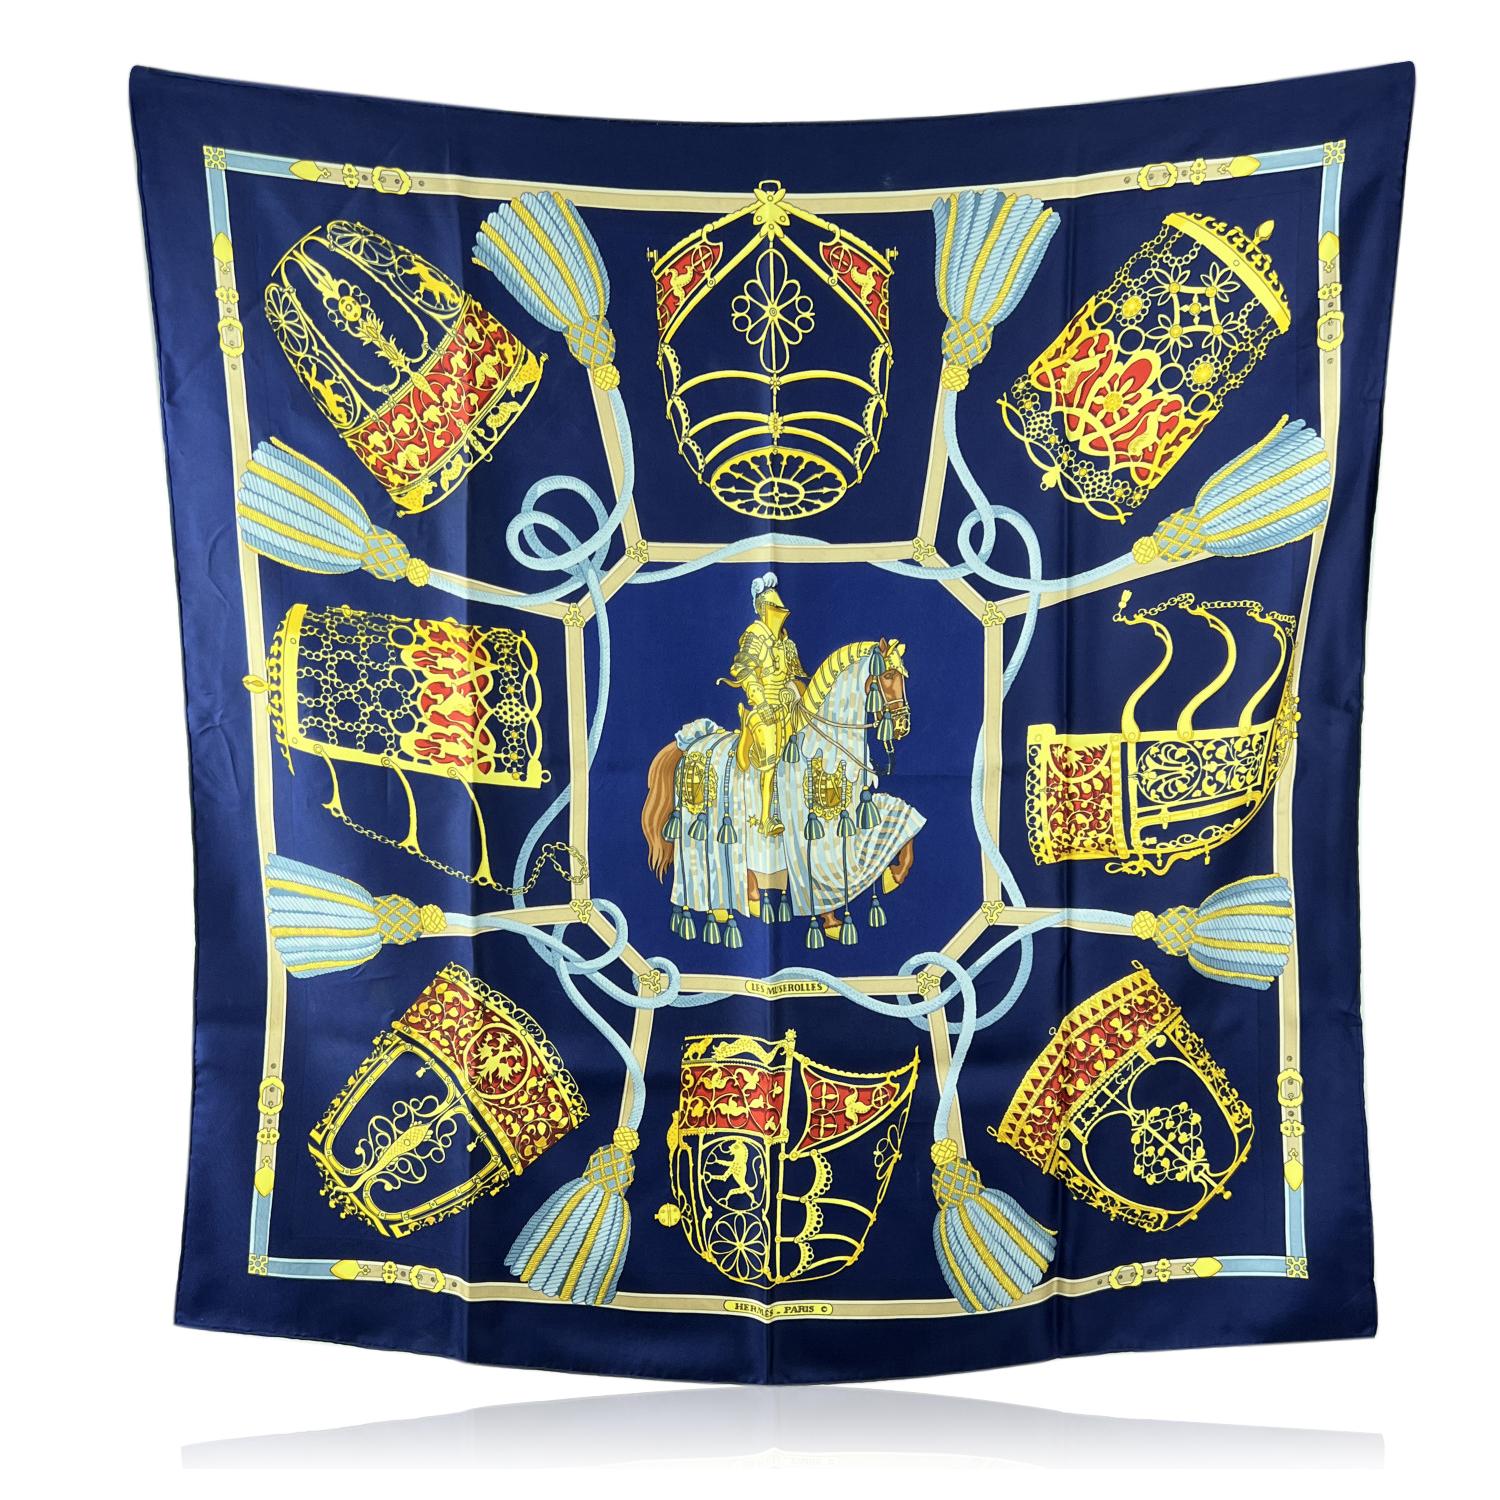 HERMES scarf 'LES MUSEROLLES' by Christiane Vauzelles, originally issued in 1986. The theme of this scarf is a scene depicting a Knight in full armor on a horse, surrounded by nasal masks for horses. Blue background. The 'Hermes Paris' logo with